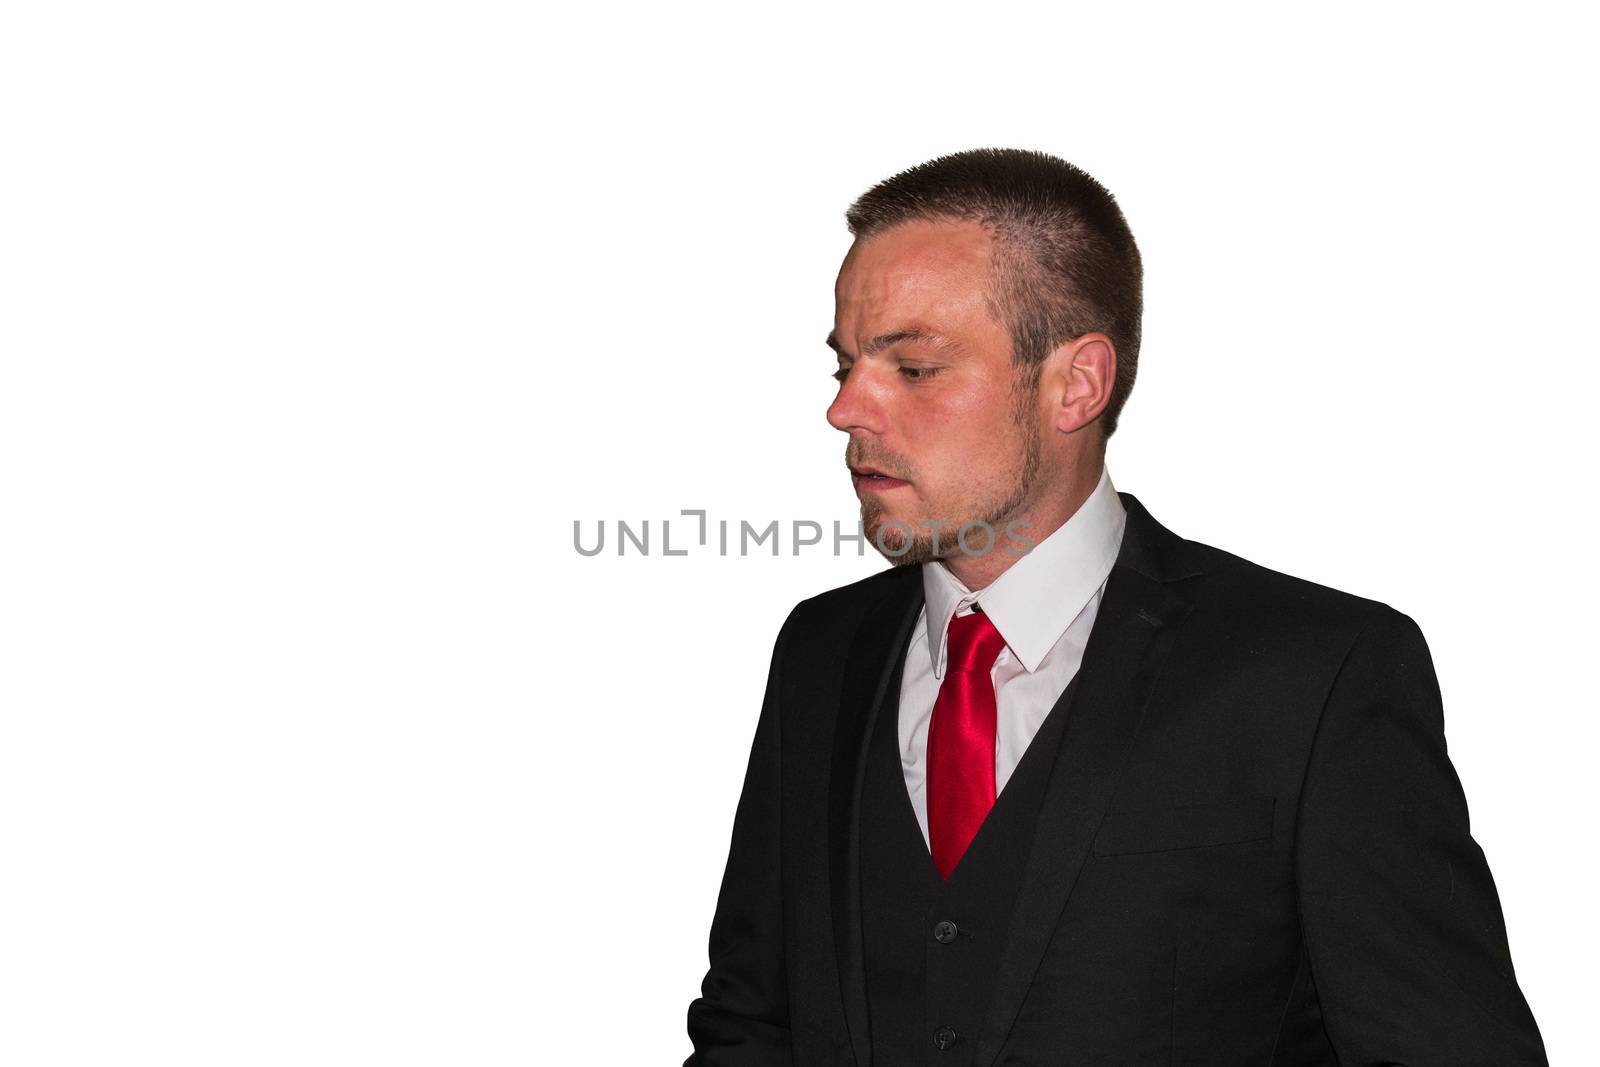 Young man in suit with red tie against white background, copy space.